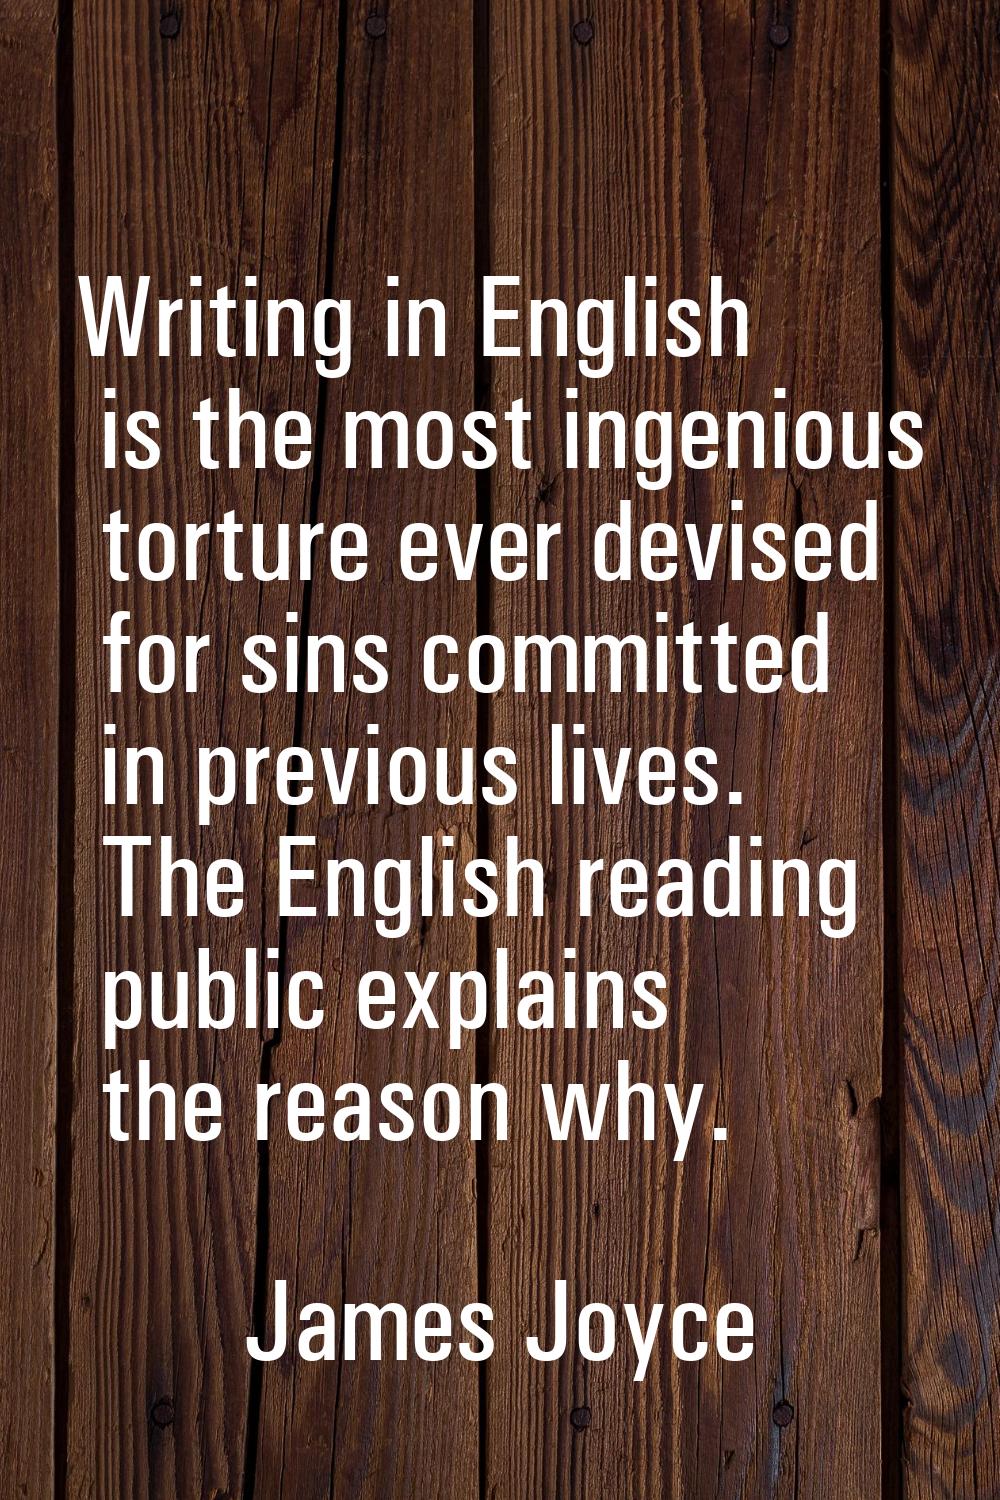 Writing in English is the most ingenious torture ever devised for sins committed in previous lives.